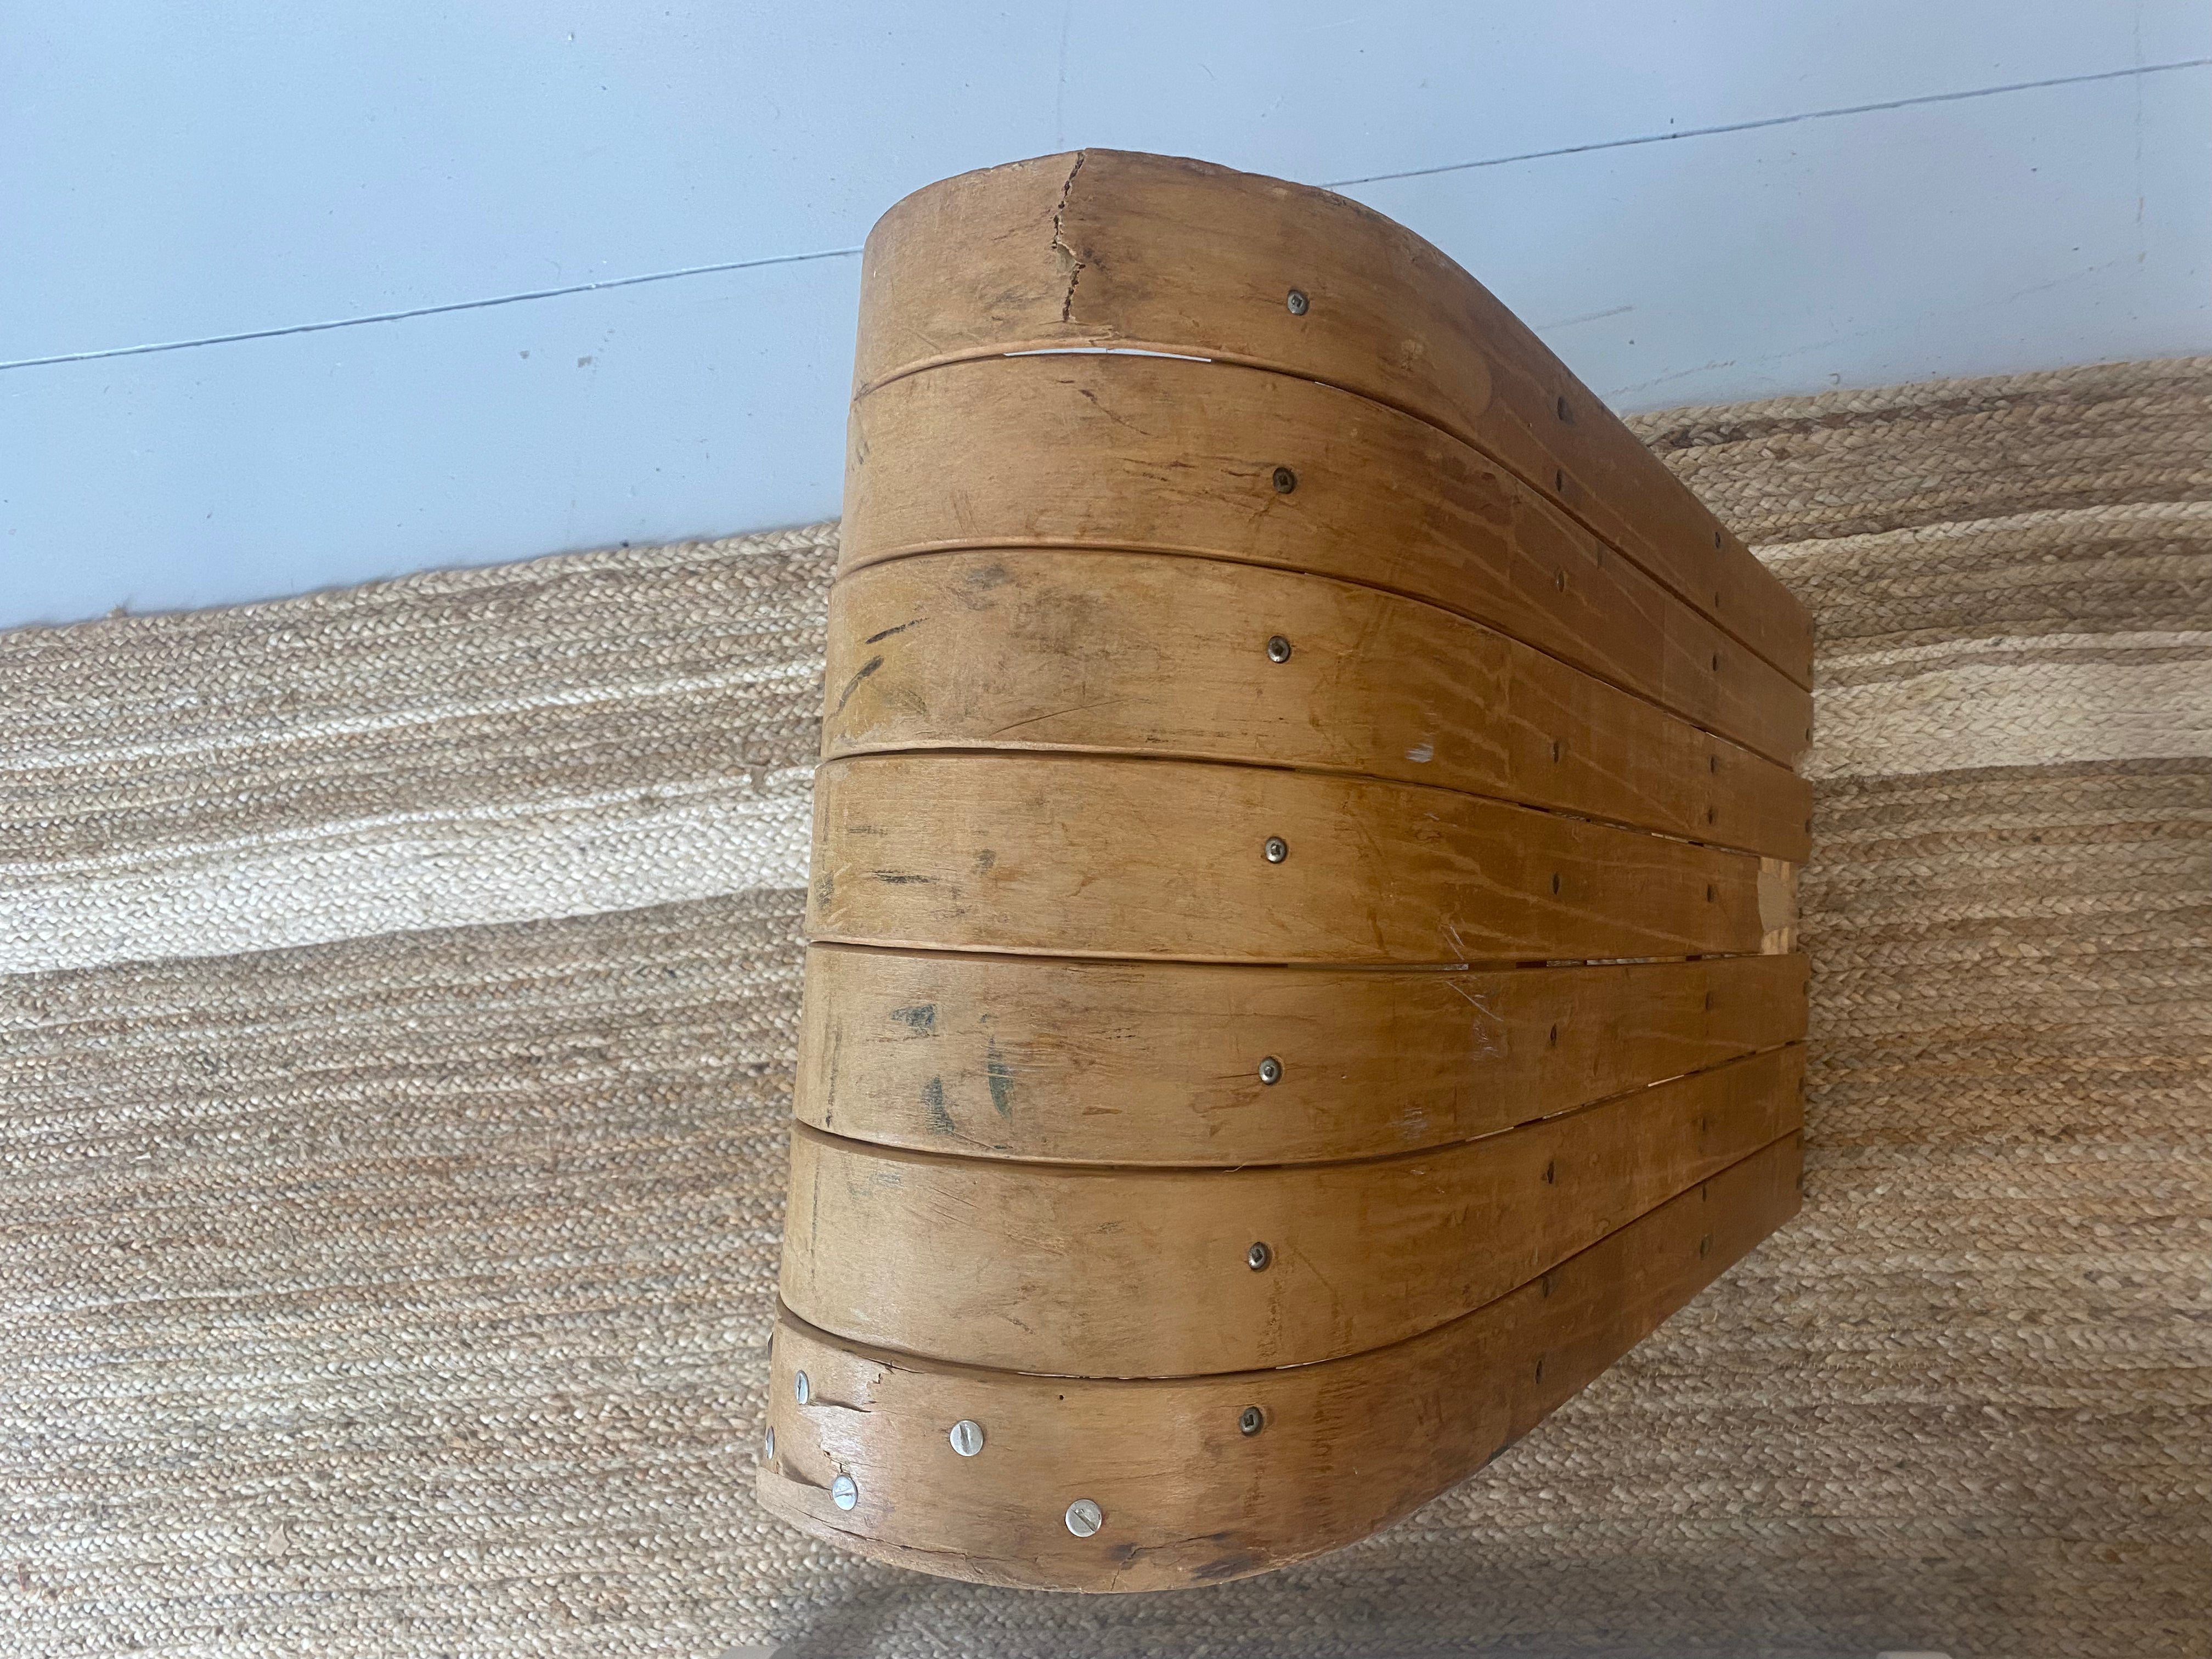 Vintage Torpedo steam bent wooden snow sled/toboggan with curved nose. view from the nose looking back along the length of the sled